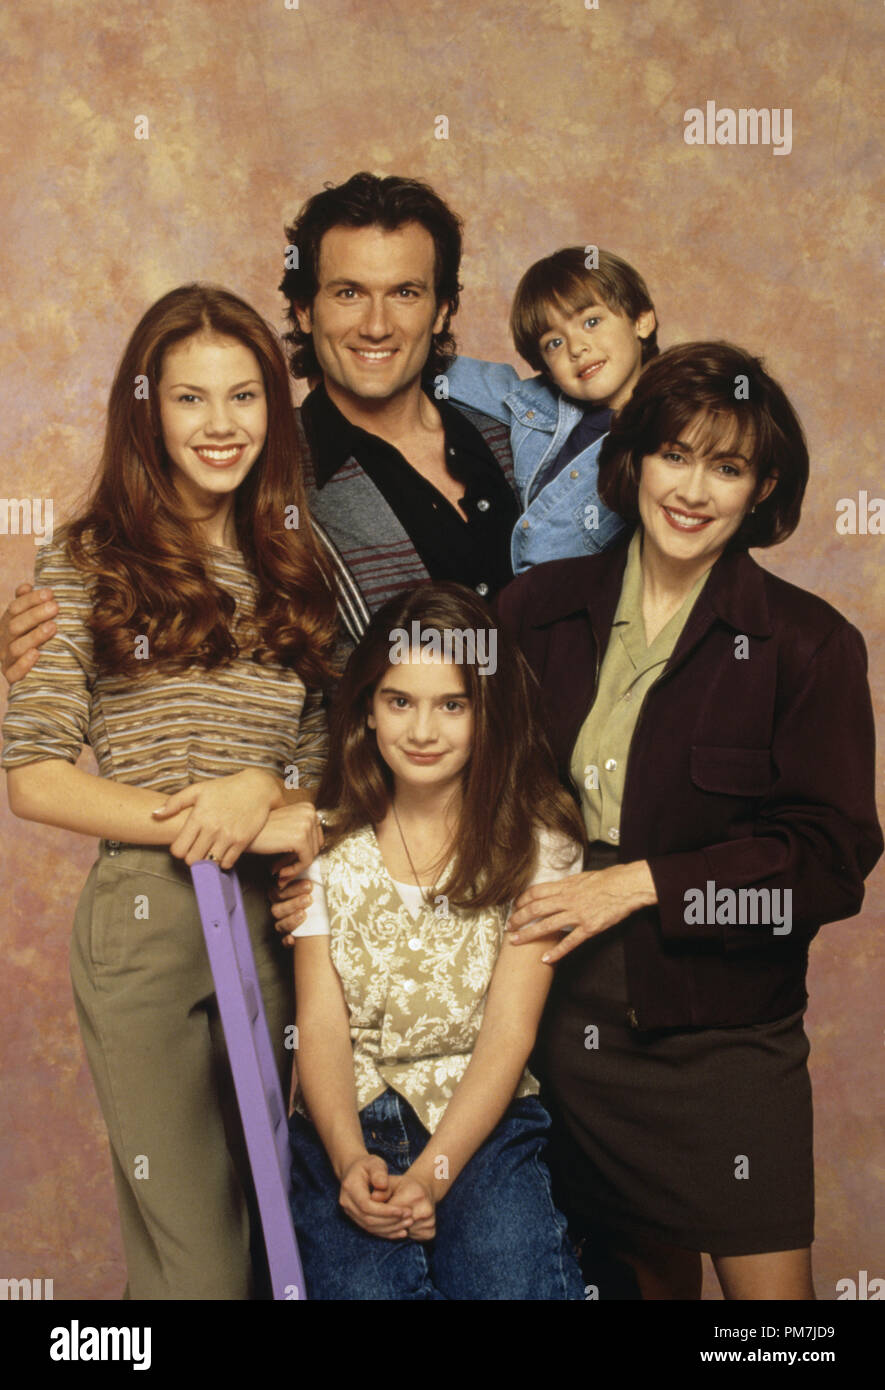 Film Still from 'Someone Like Me' Nikki Cox, Anthony Tyler Quinn, Joseph Tello, Patricia Heaton, Gaby Hoffmann circa 1994 Photo Credit: Chris Haston     File Reference # 31129145THA  For Editorial Use Only - All Rights Reserved Stock Photo